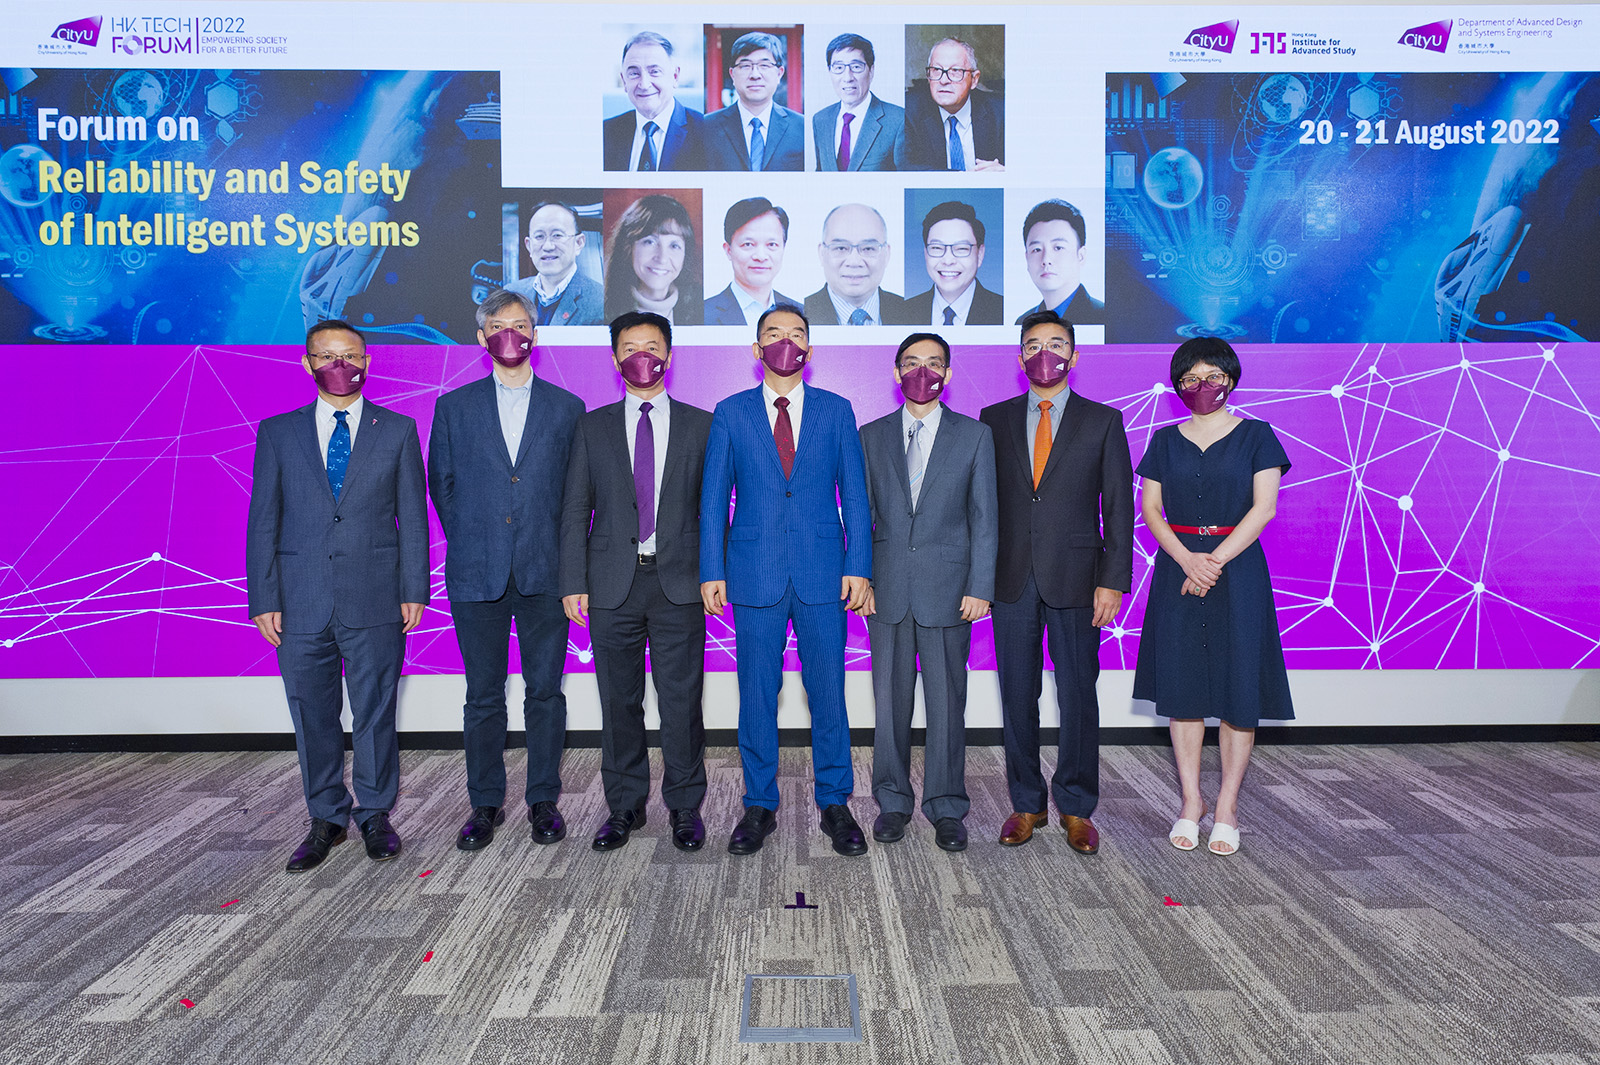 Reliability and safety of intelligent systems feature at 2nd HK Tech Forum at CityU